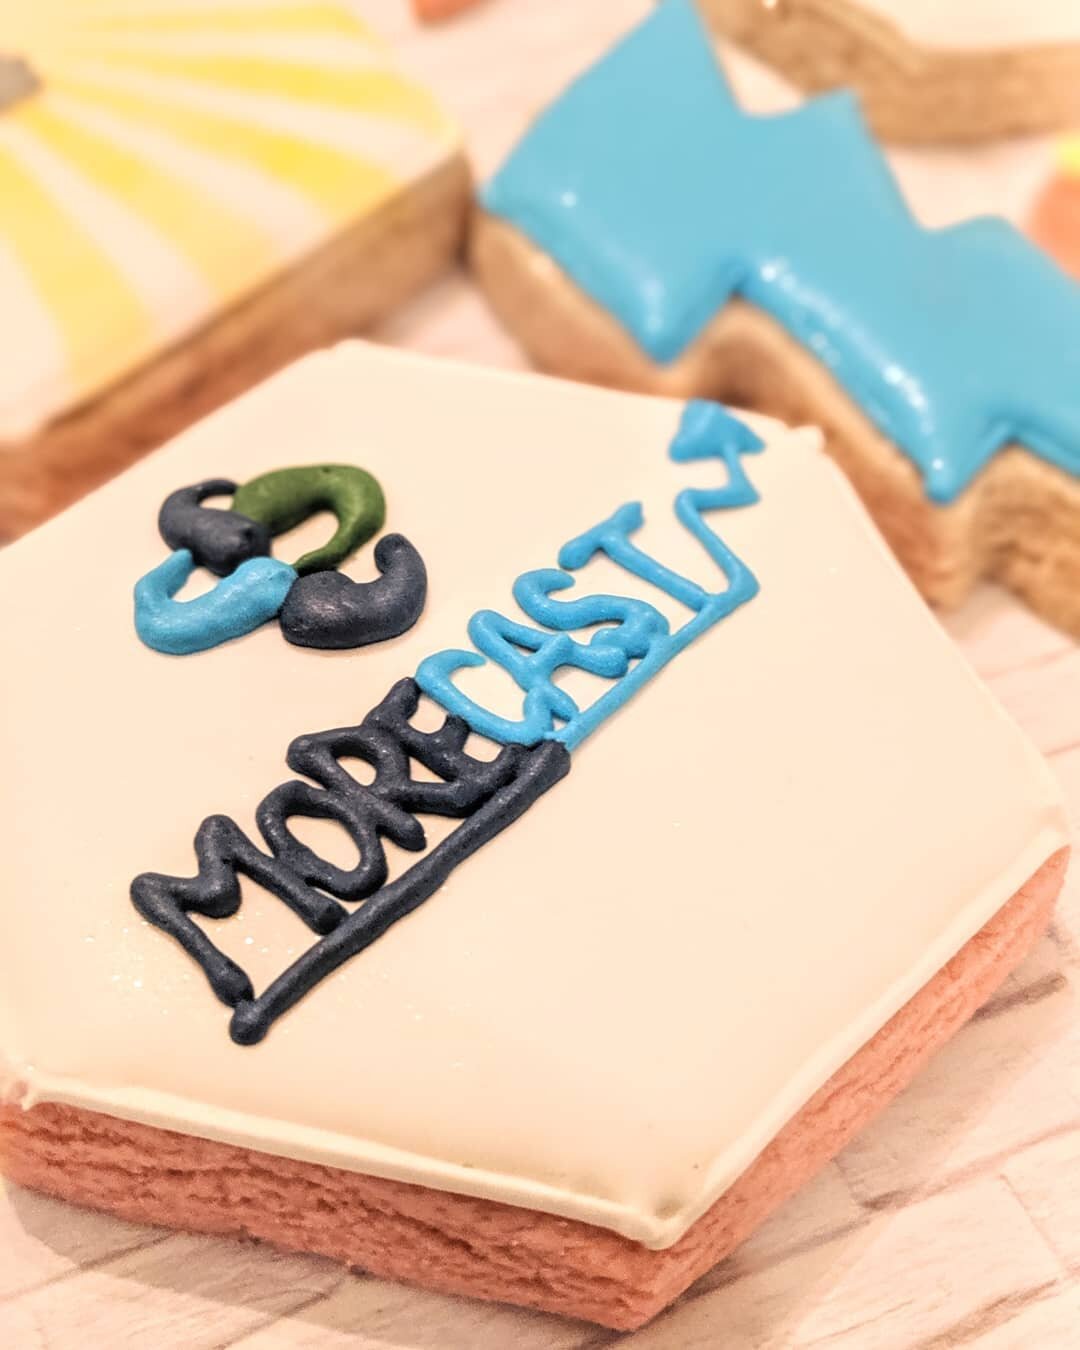 Had a lot of fun making these for a @duke_energy team here in Charlotte ⚡

#royalicing #sugarcookiesofinstagram #cookiedecorating #cookiesofinstagram #logocookies